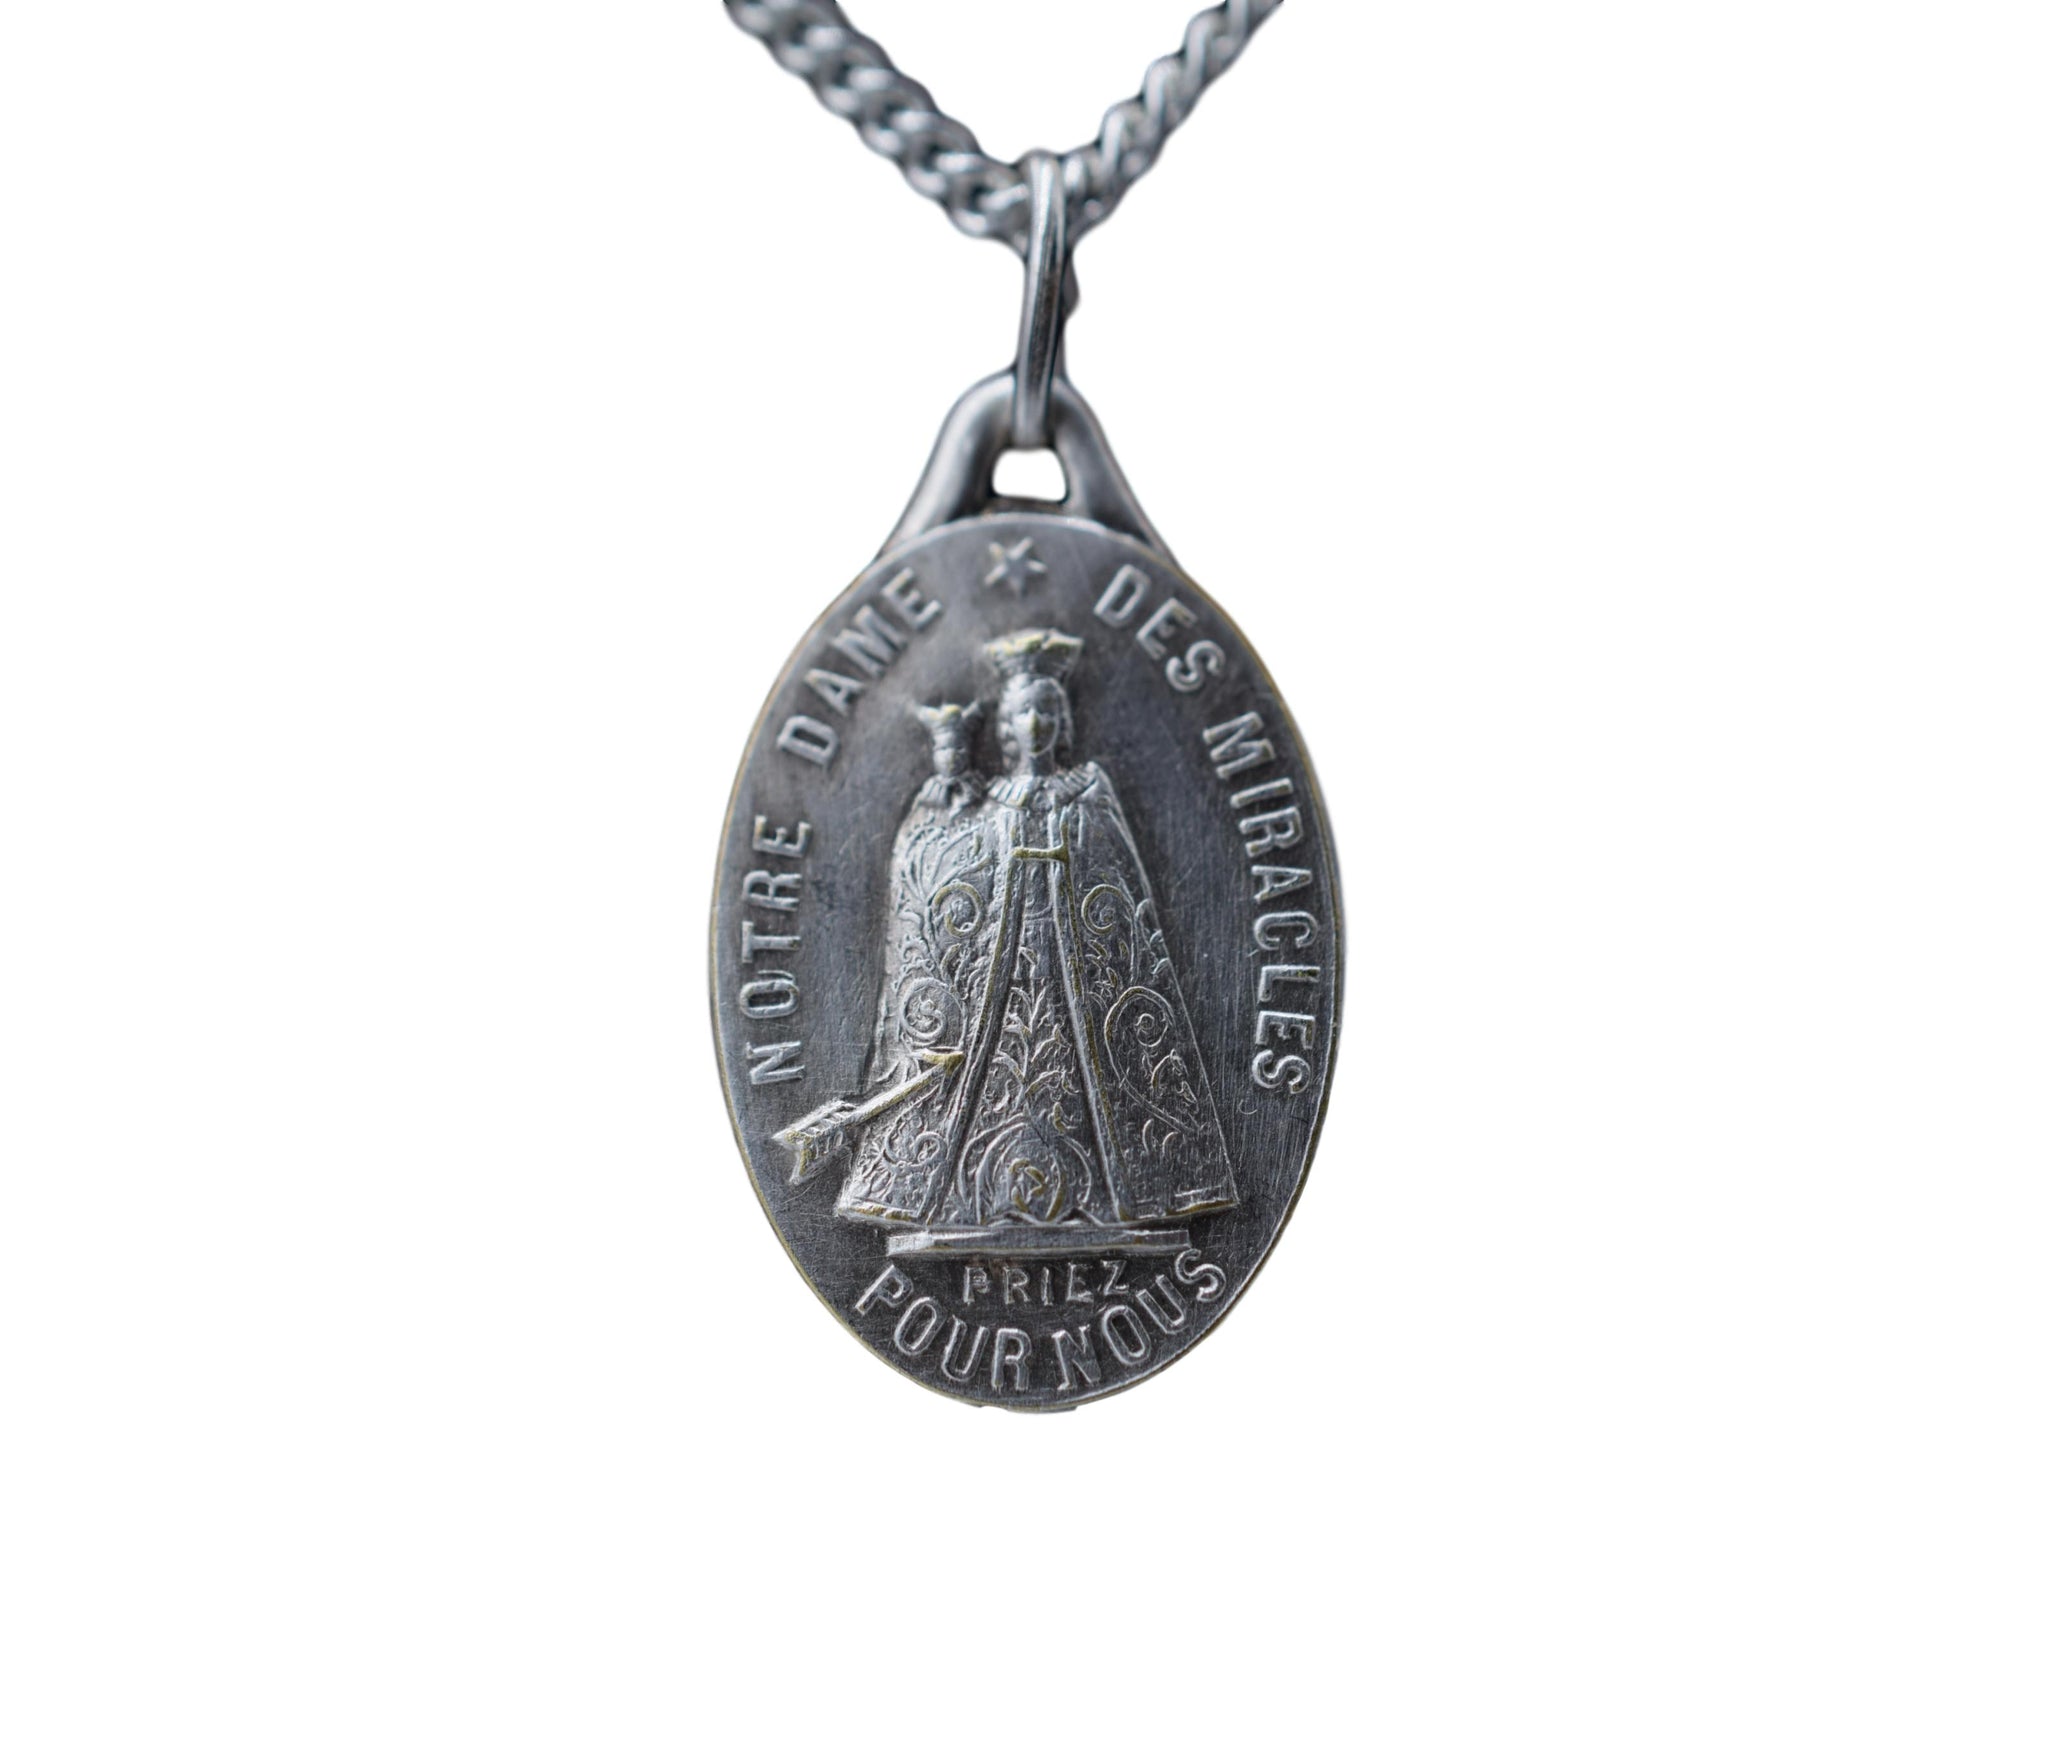 Our Lady of Miracles Medal Pendant